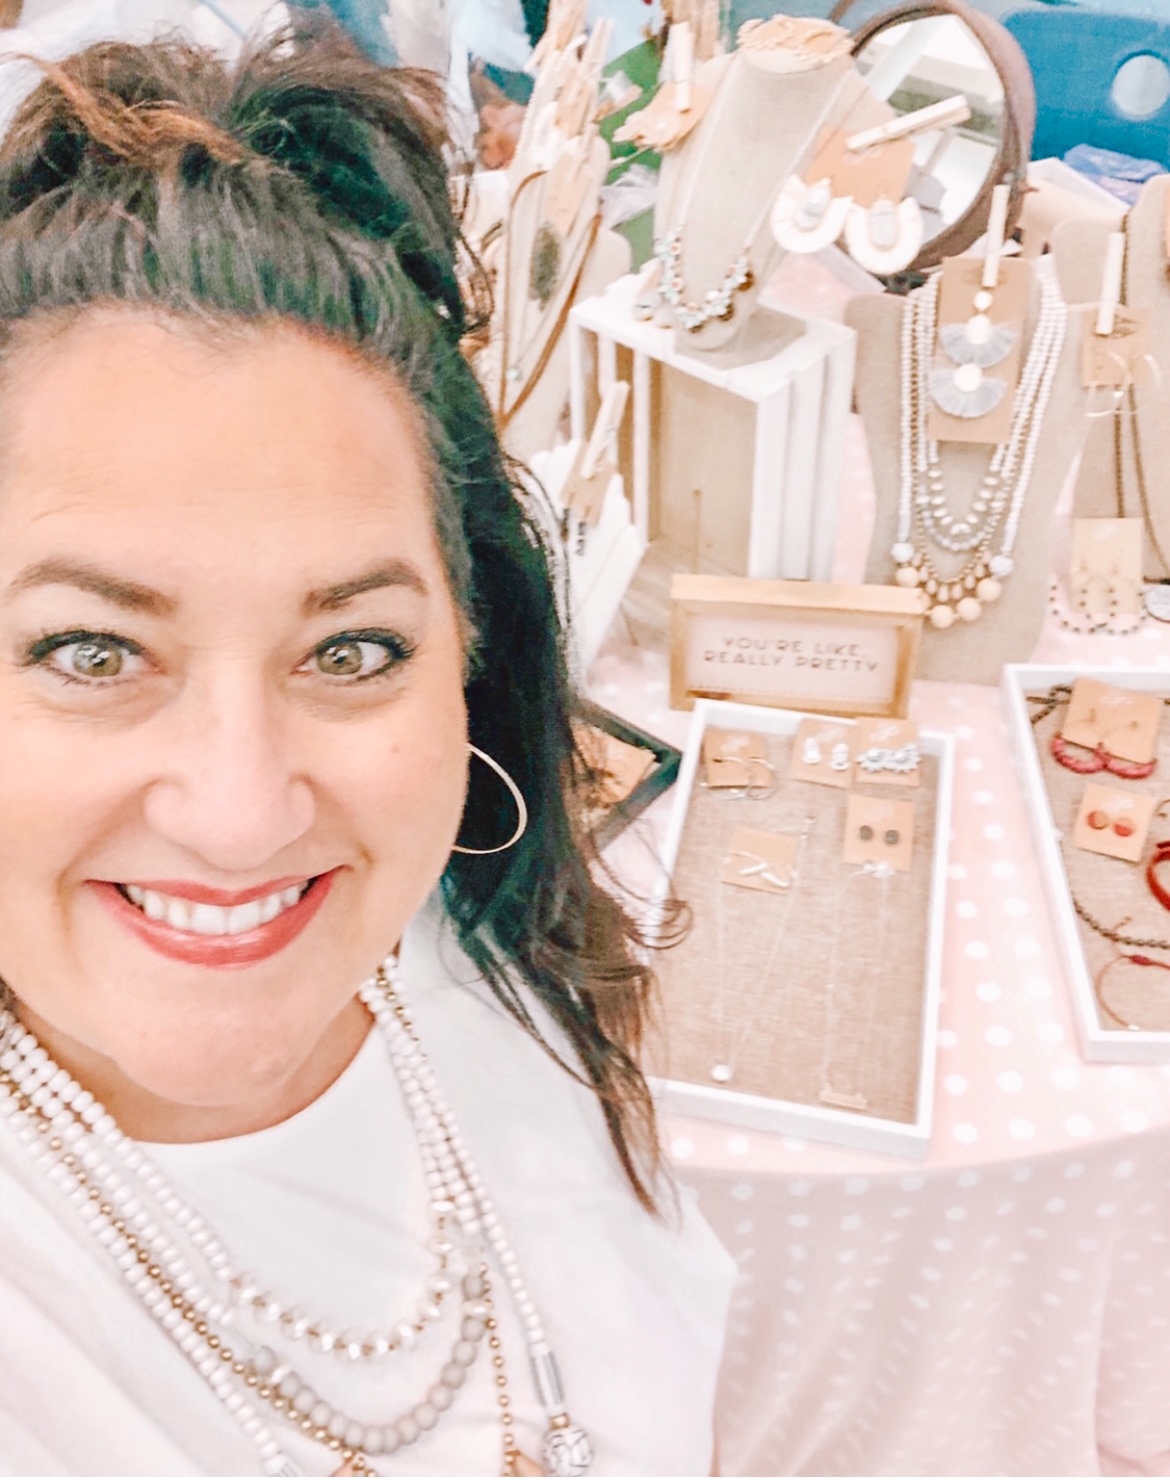 Paulette Fryar wearS pieces of her jewelry from her business as an independent distributor. Fyar has been in the business for four years and has been able to continue working as she has relocated throughout the country with her spouse.